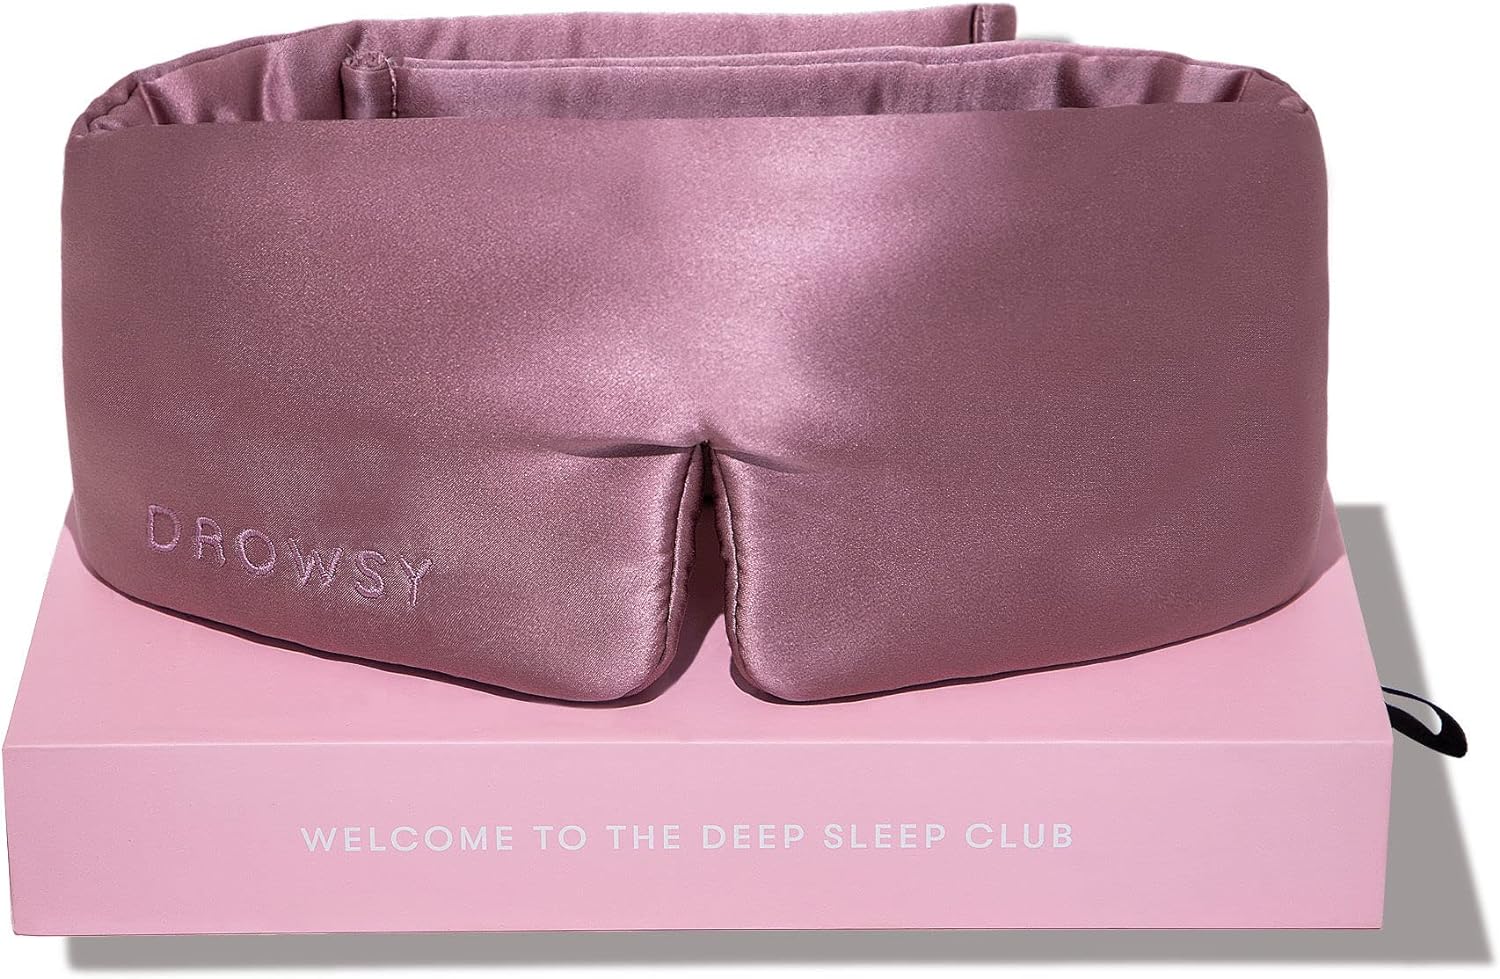 DROWSY Silk Sleep Mask. Face-Hugging, Padded Silk Cocoon for Luxury Sleep in Total Darkness (Damask Rose)